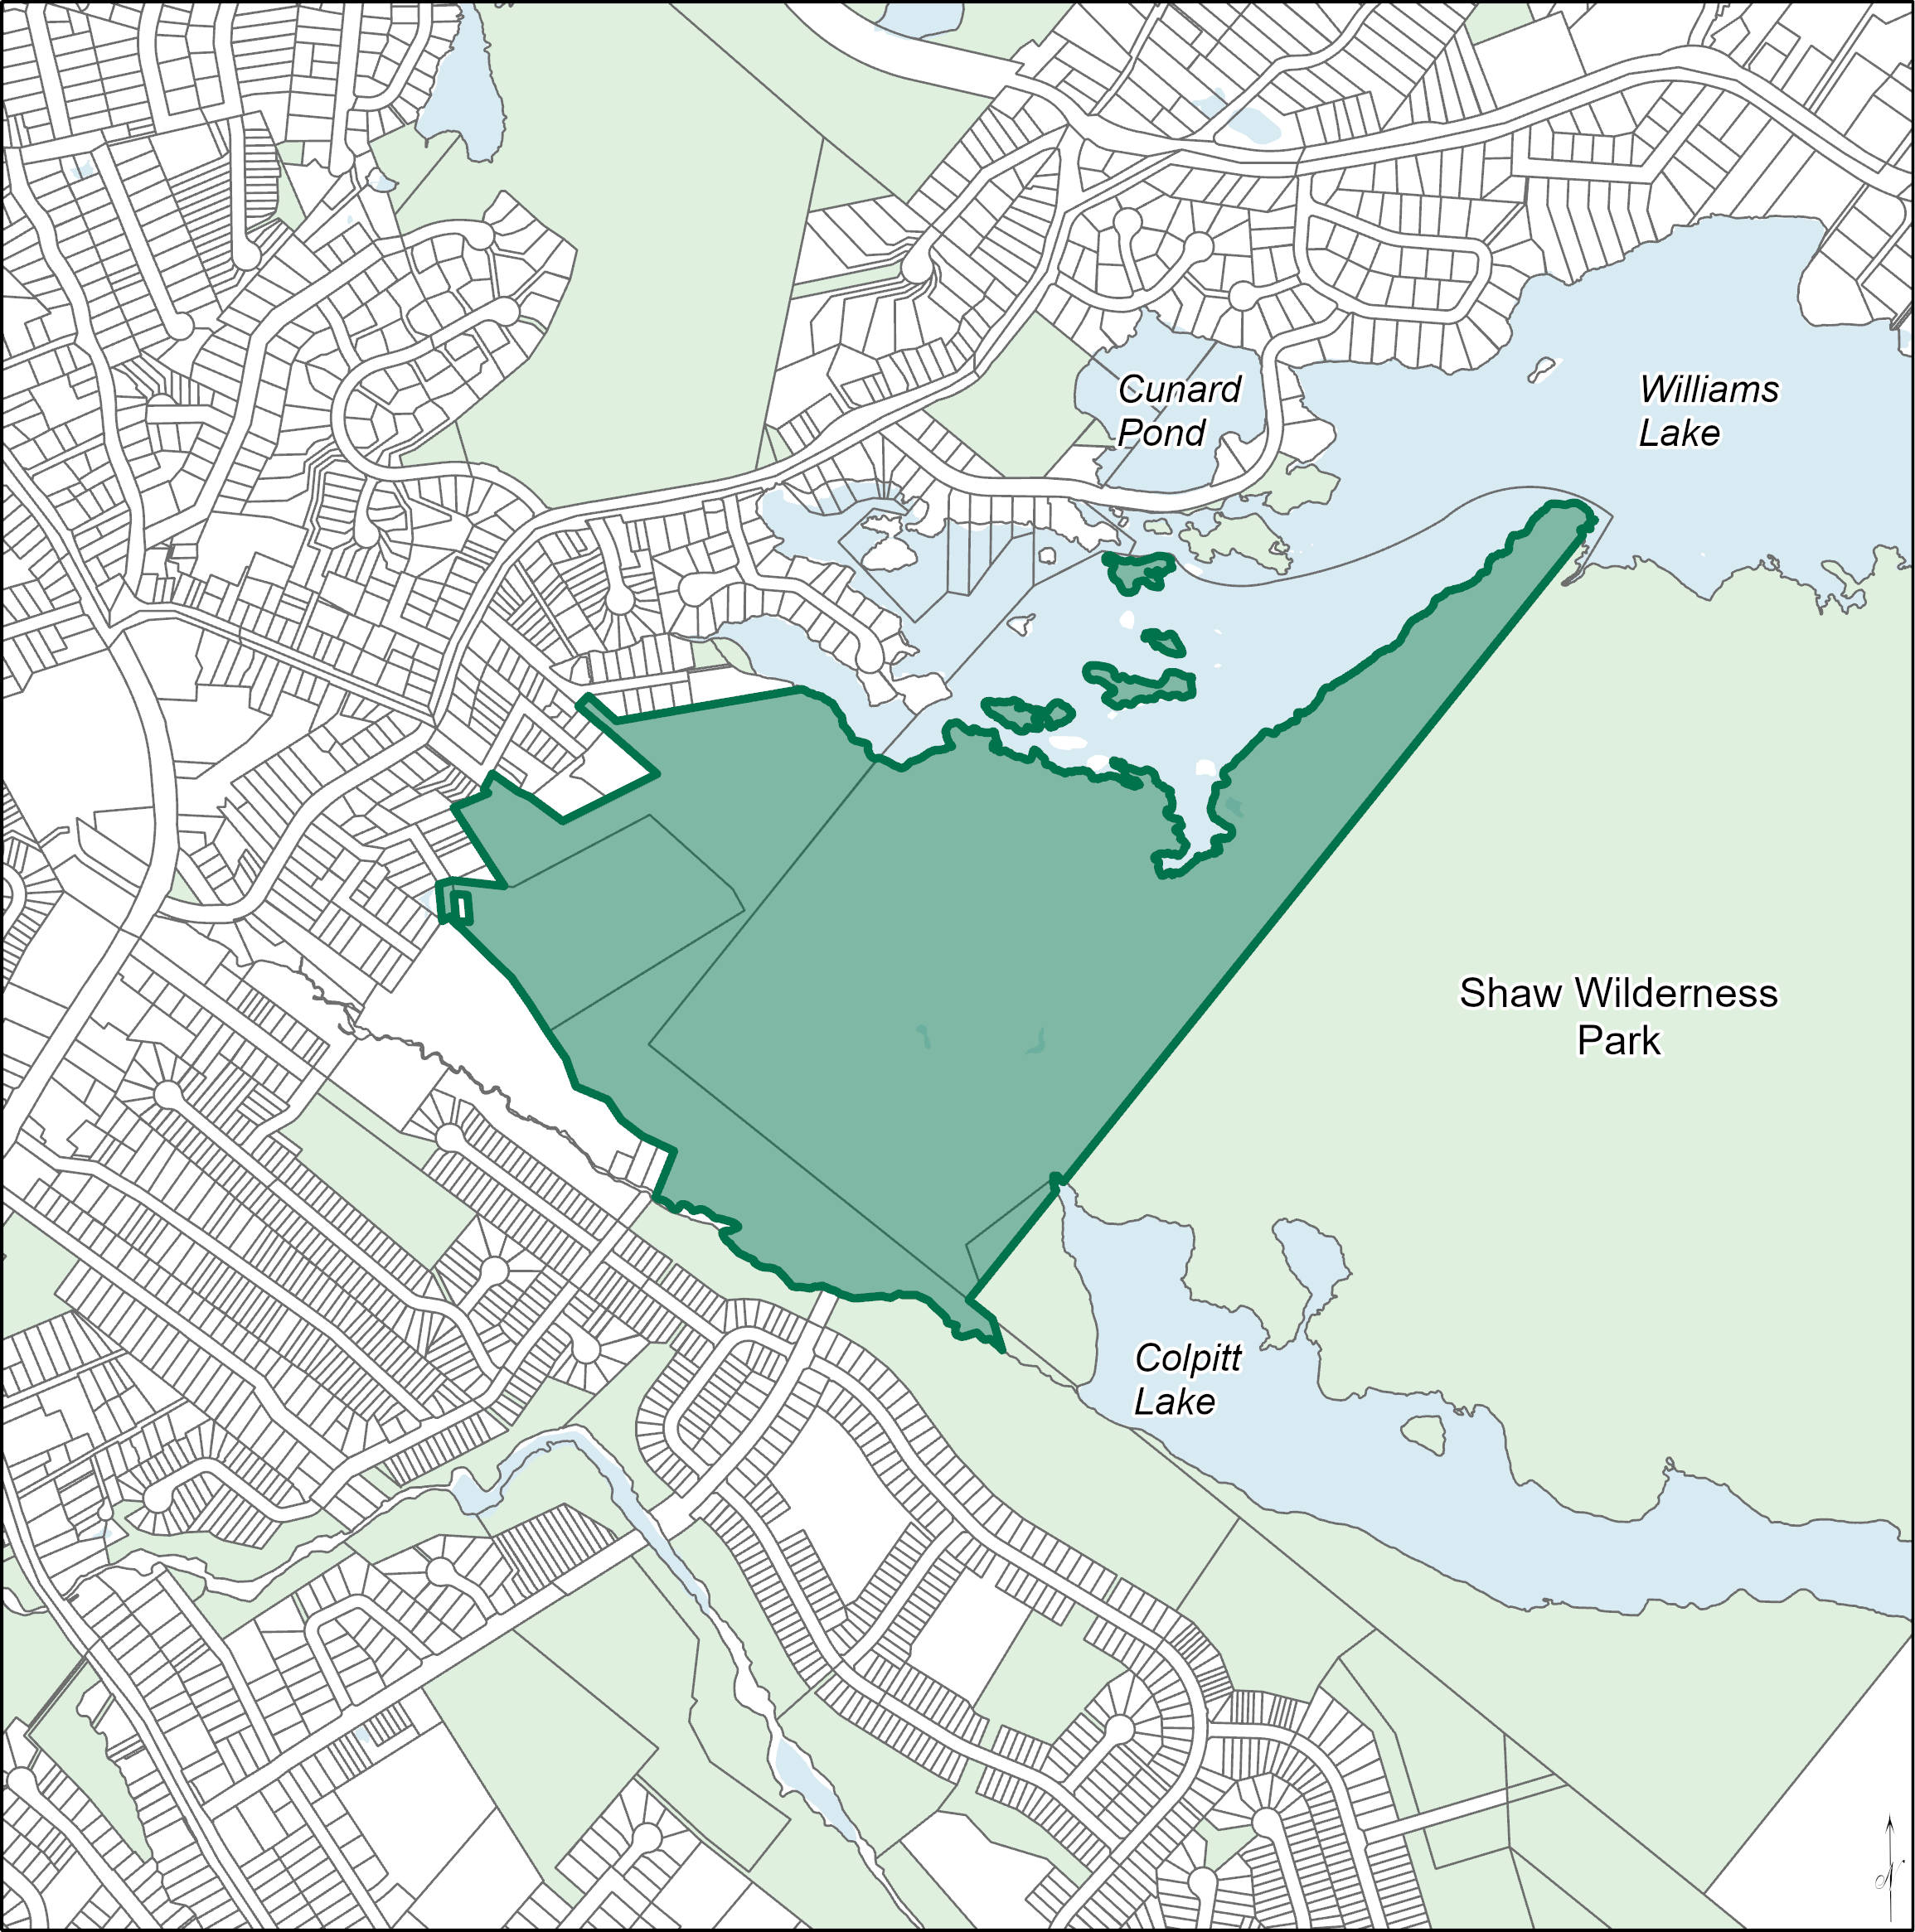 Image of a map of Williams Lake and the surrounding areas/communities with a highlighted section showing approximately 46 hectares of undeveloped land between Williams Lake, Shaw Wilderness Park, Danforth Road and Williams Lake Road.